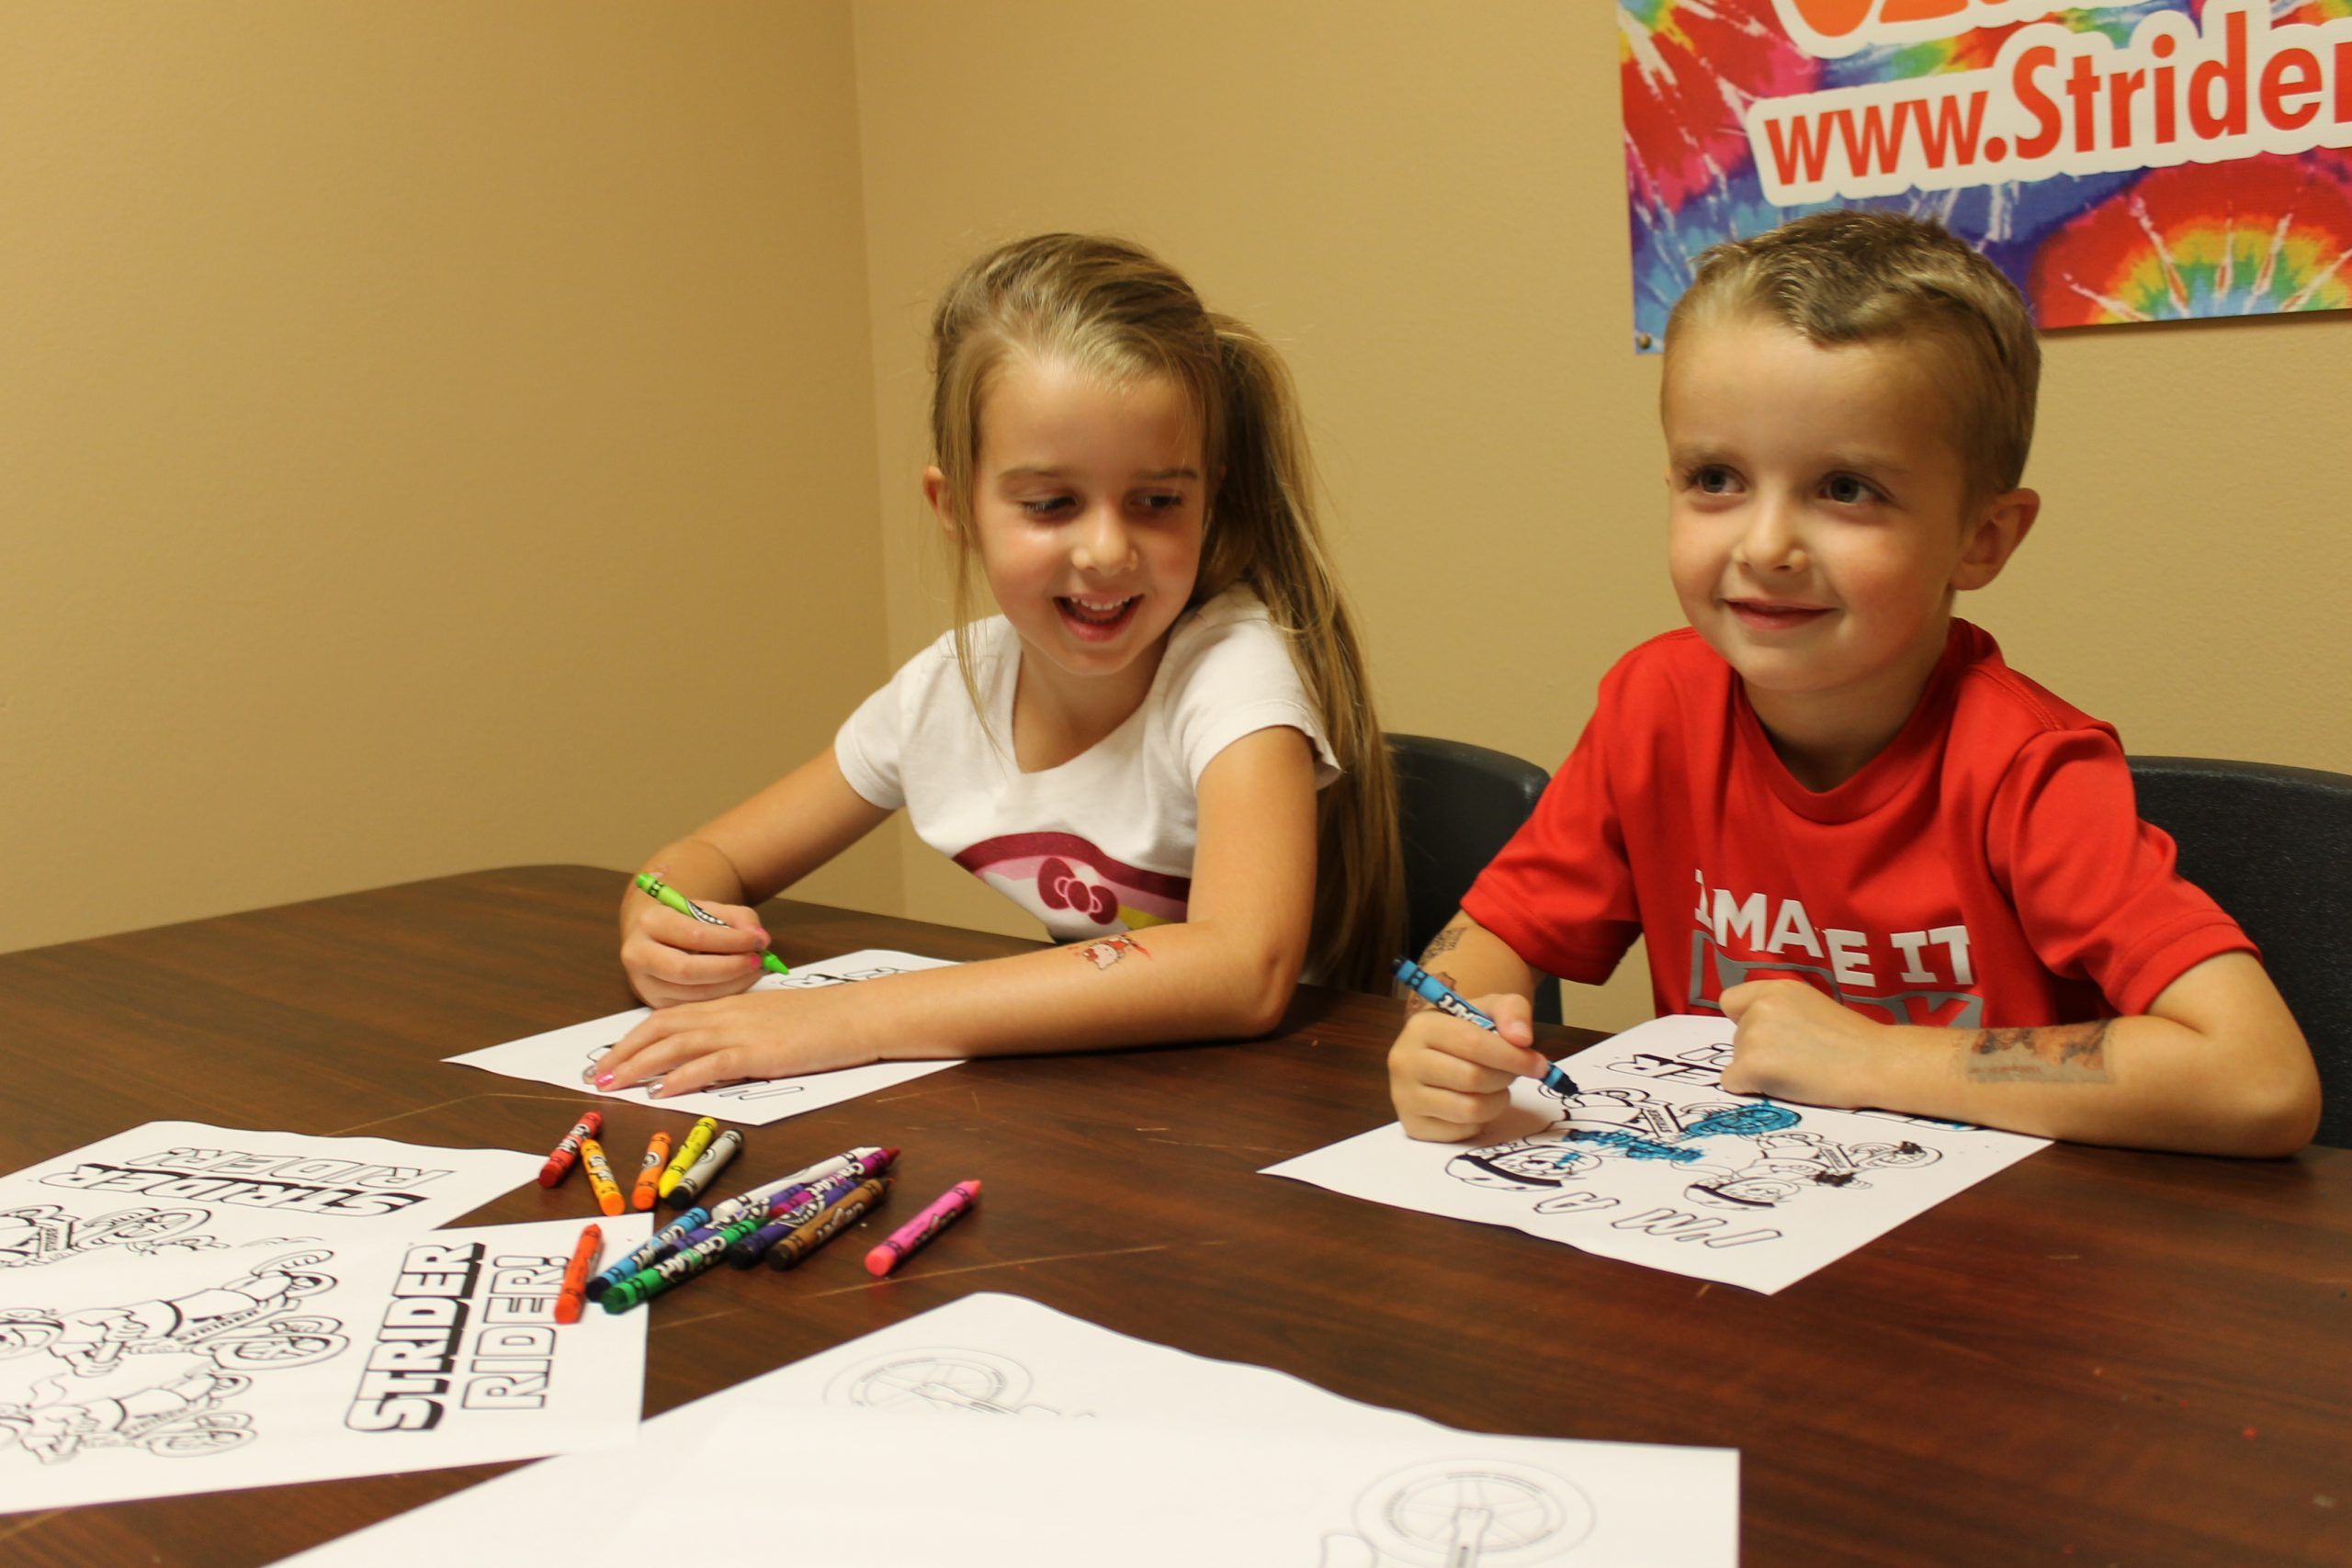 Kids coloring on coloring sheets